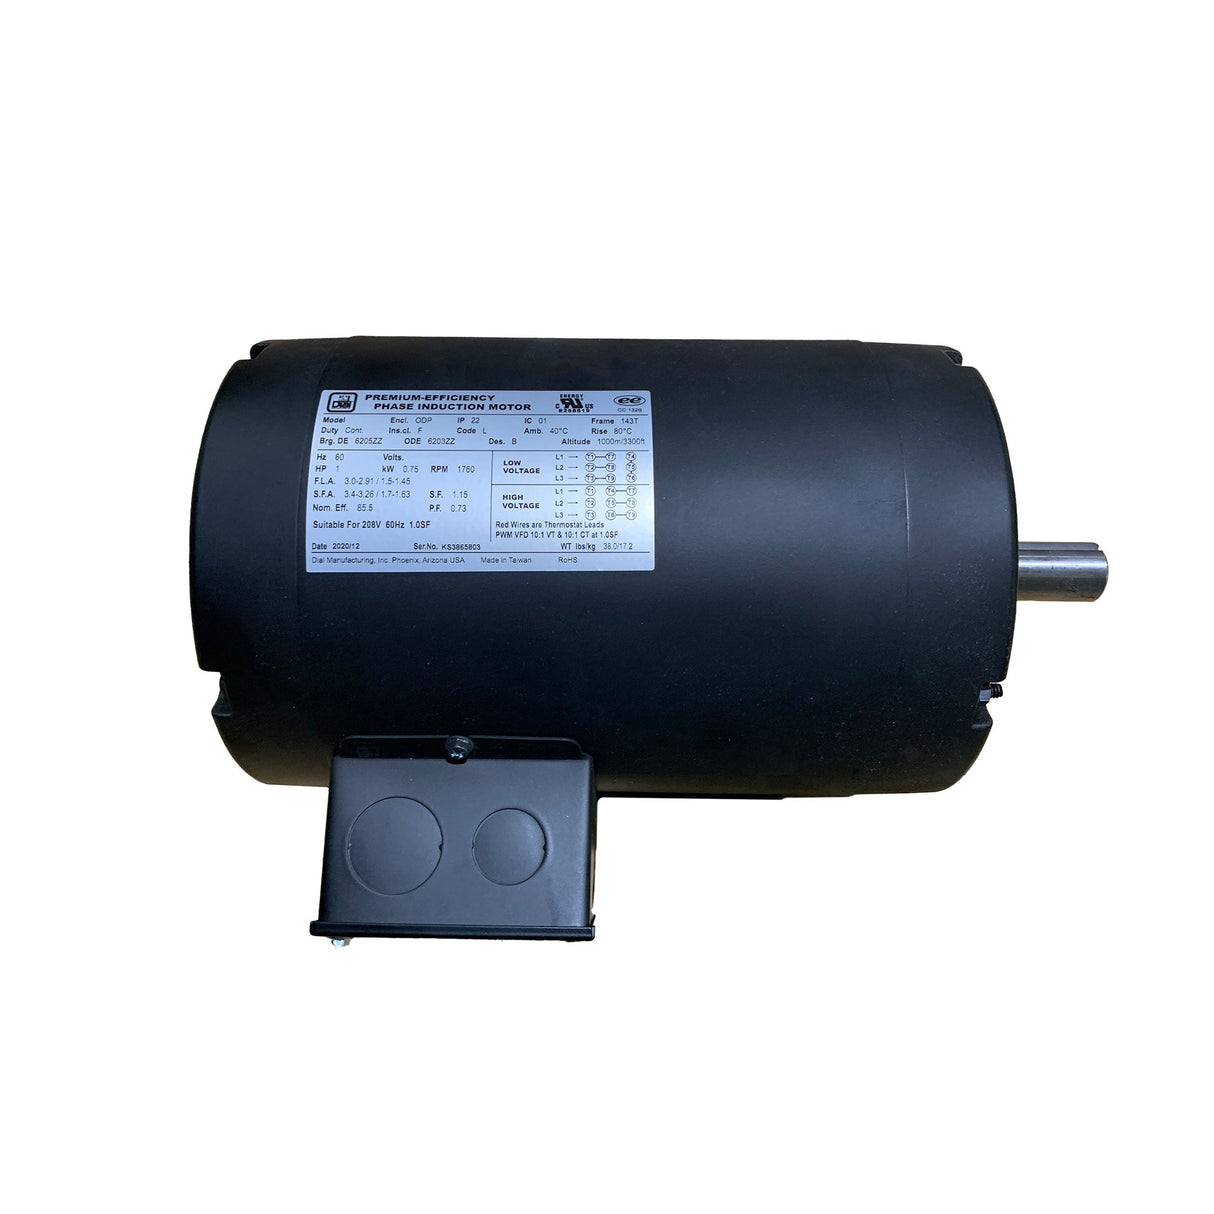 Dial Manufacturing 115/230V 1½ HP 1 Phase Industrial Motor